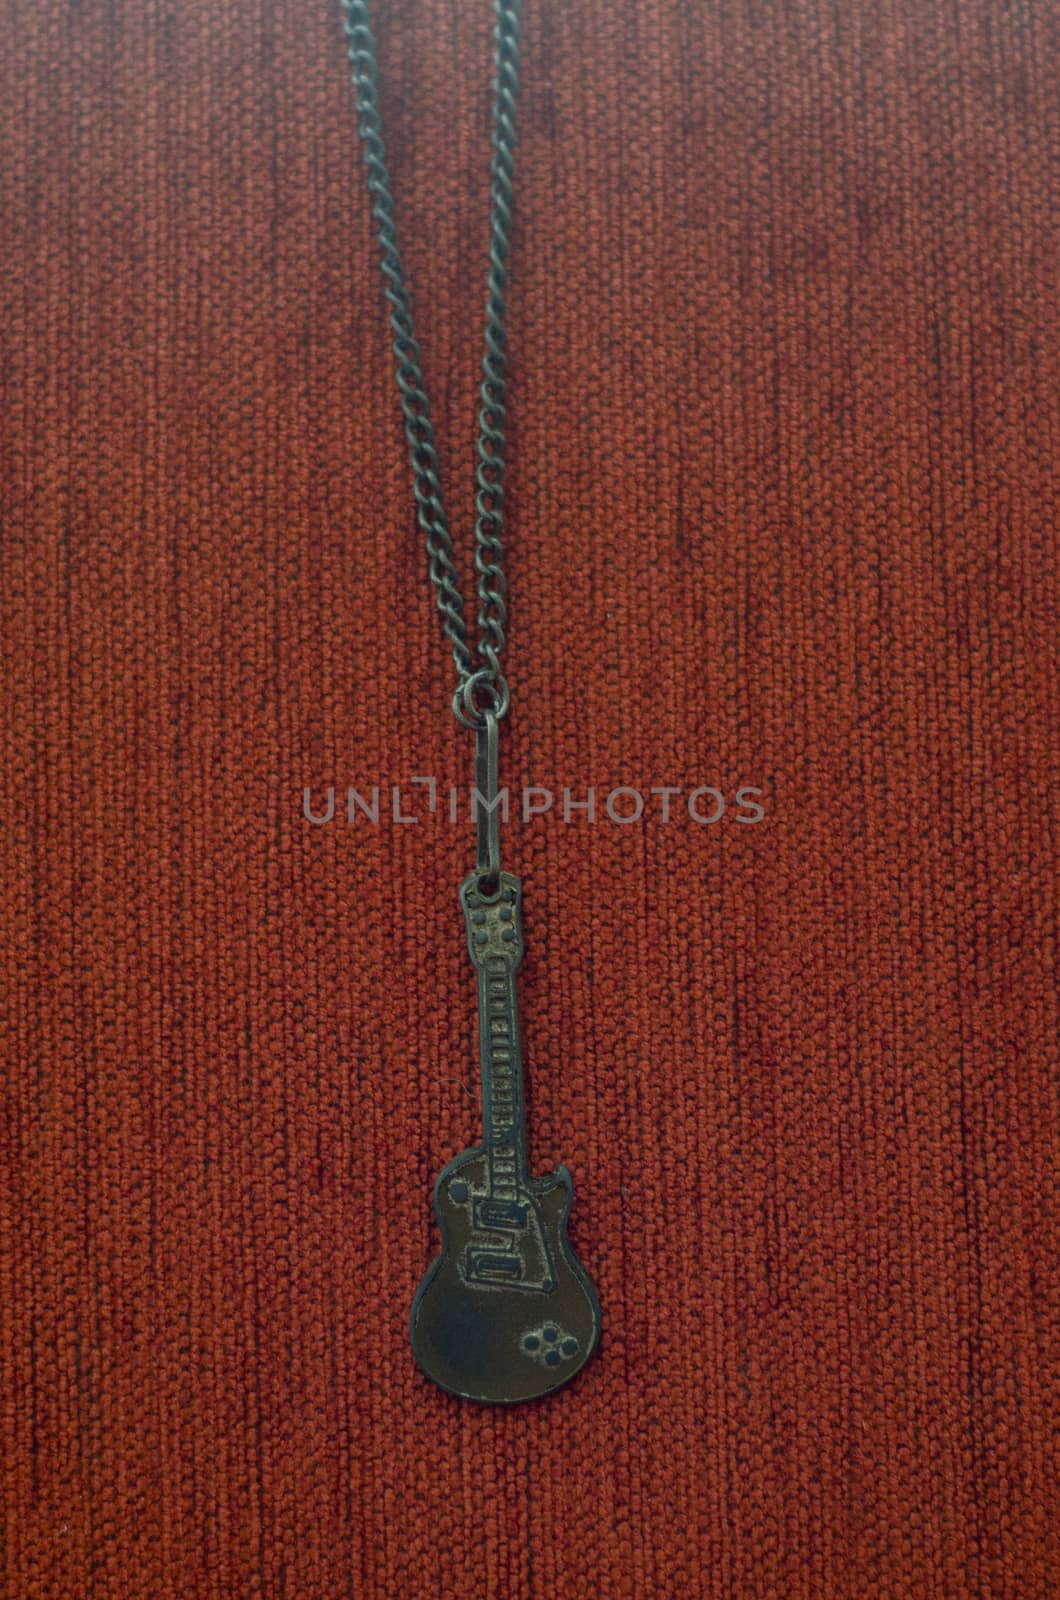 Old Rusty Guitar Necklace, Vintage Rusty Guitar Necklace, Accessory by Hasilyus